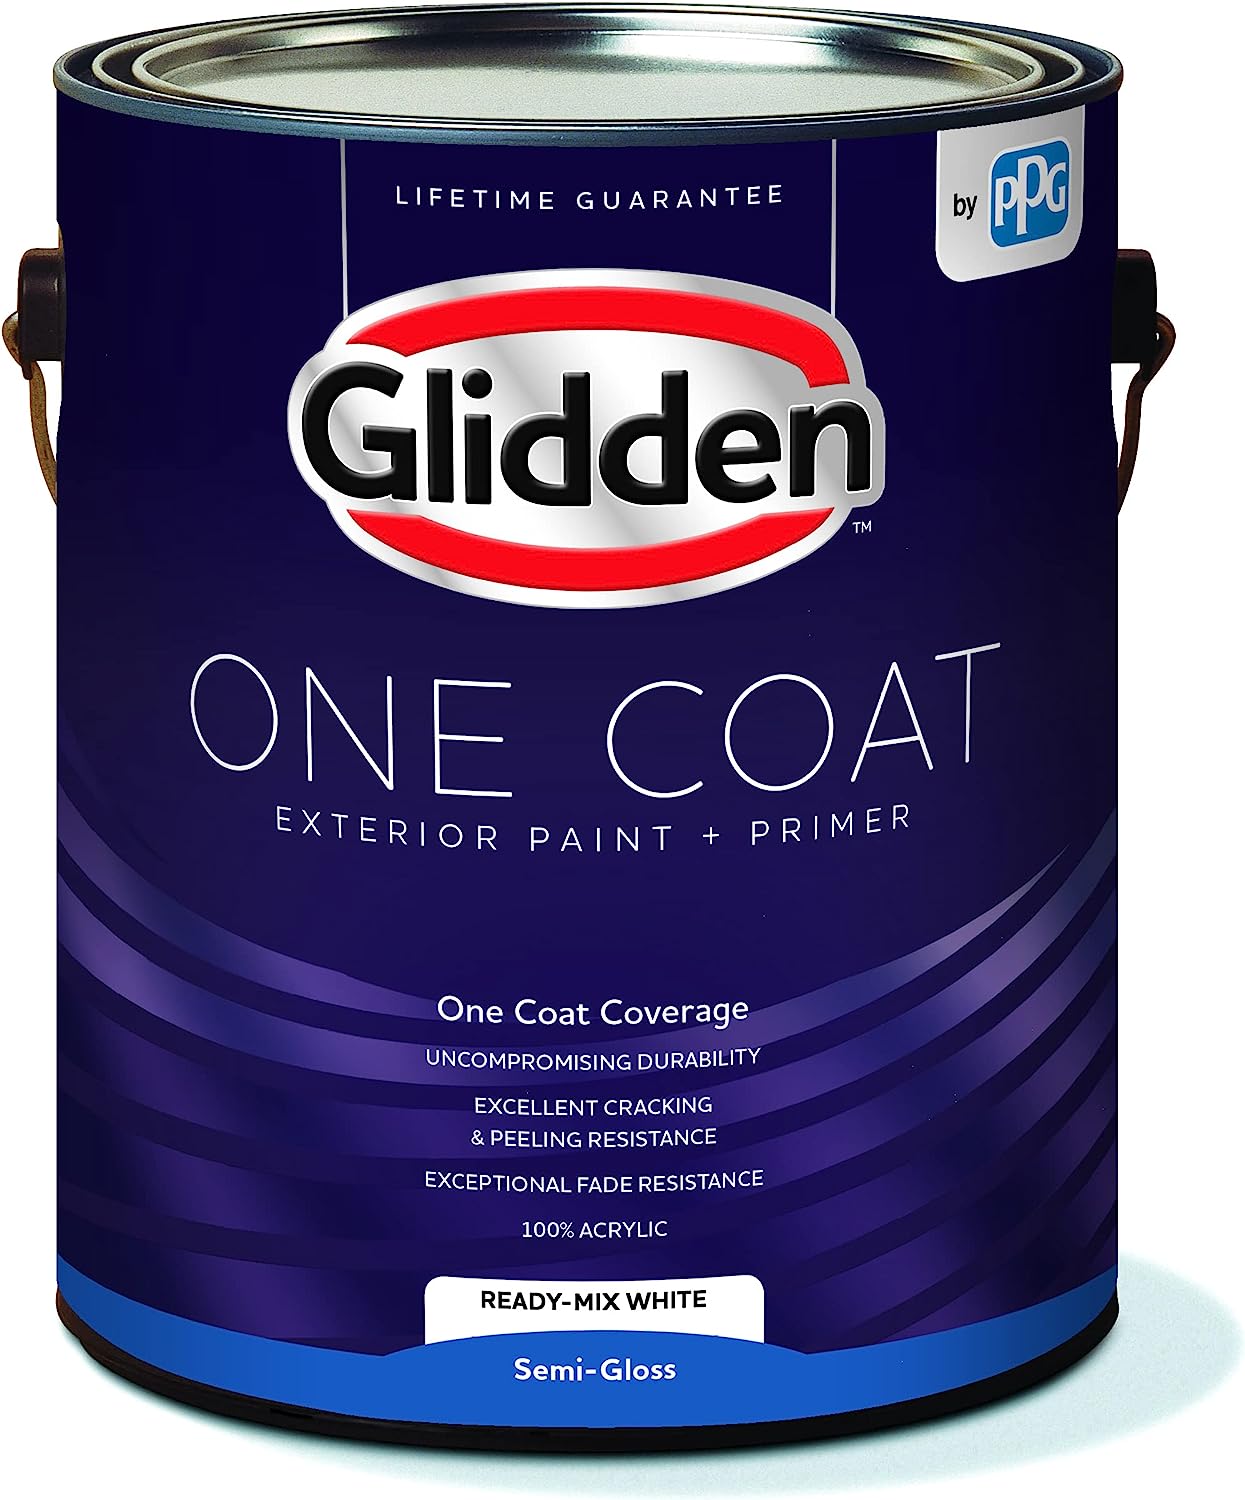 Glidden One Coat Exterior Paint and Primer All-in-One [...]